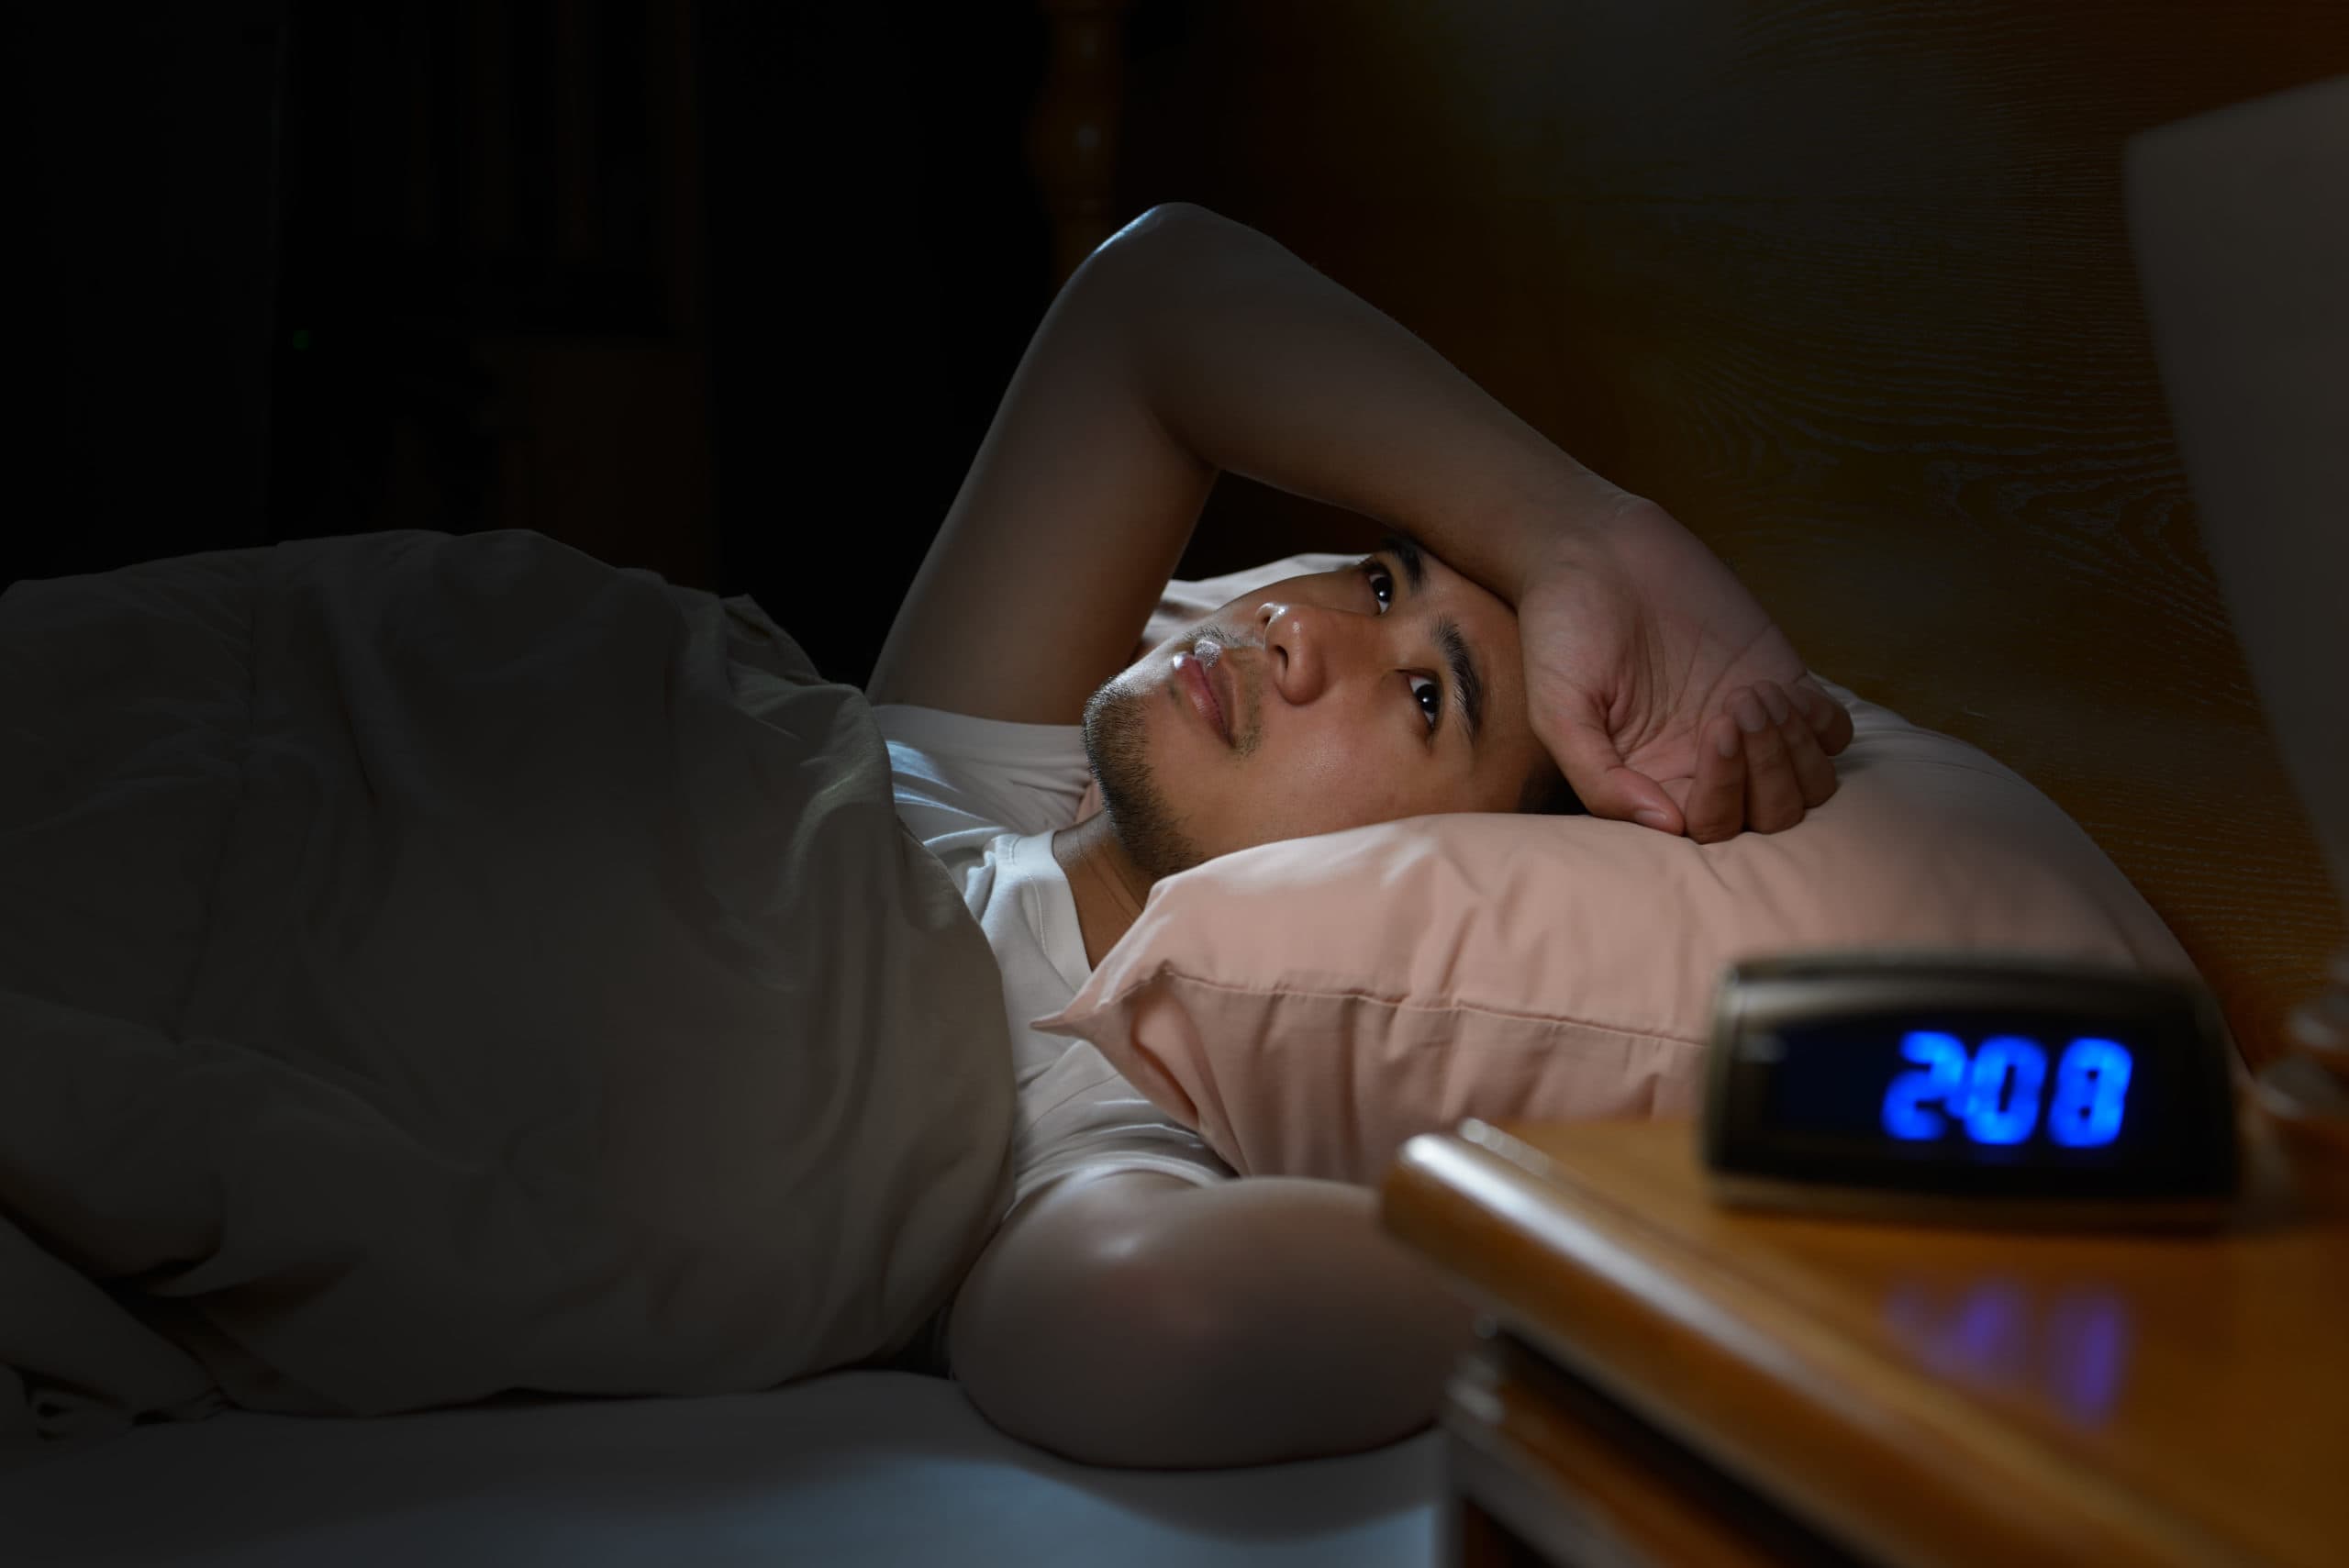 man laying awake in bed as the clock reads 2:08am and he is wondering what to do when you can't sleep